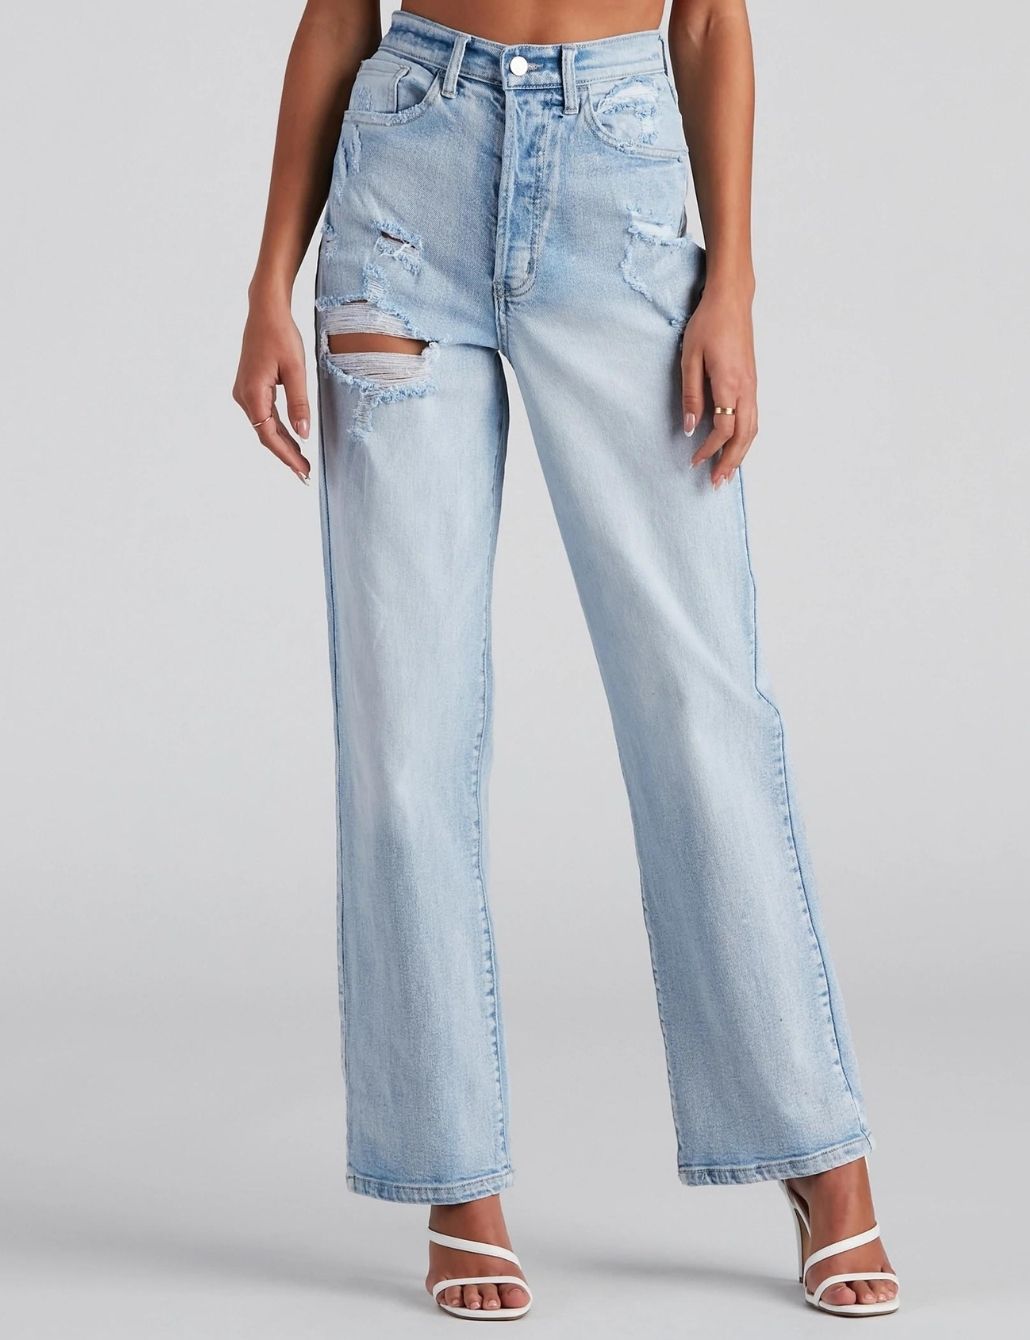 Uptown / Almost Famous  Chic jean outfits, Women jeans, Ripped jeggings